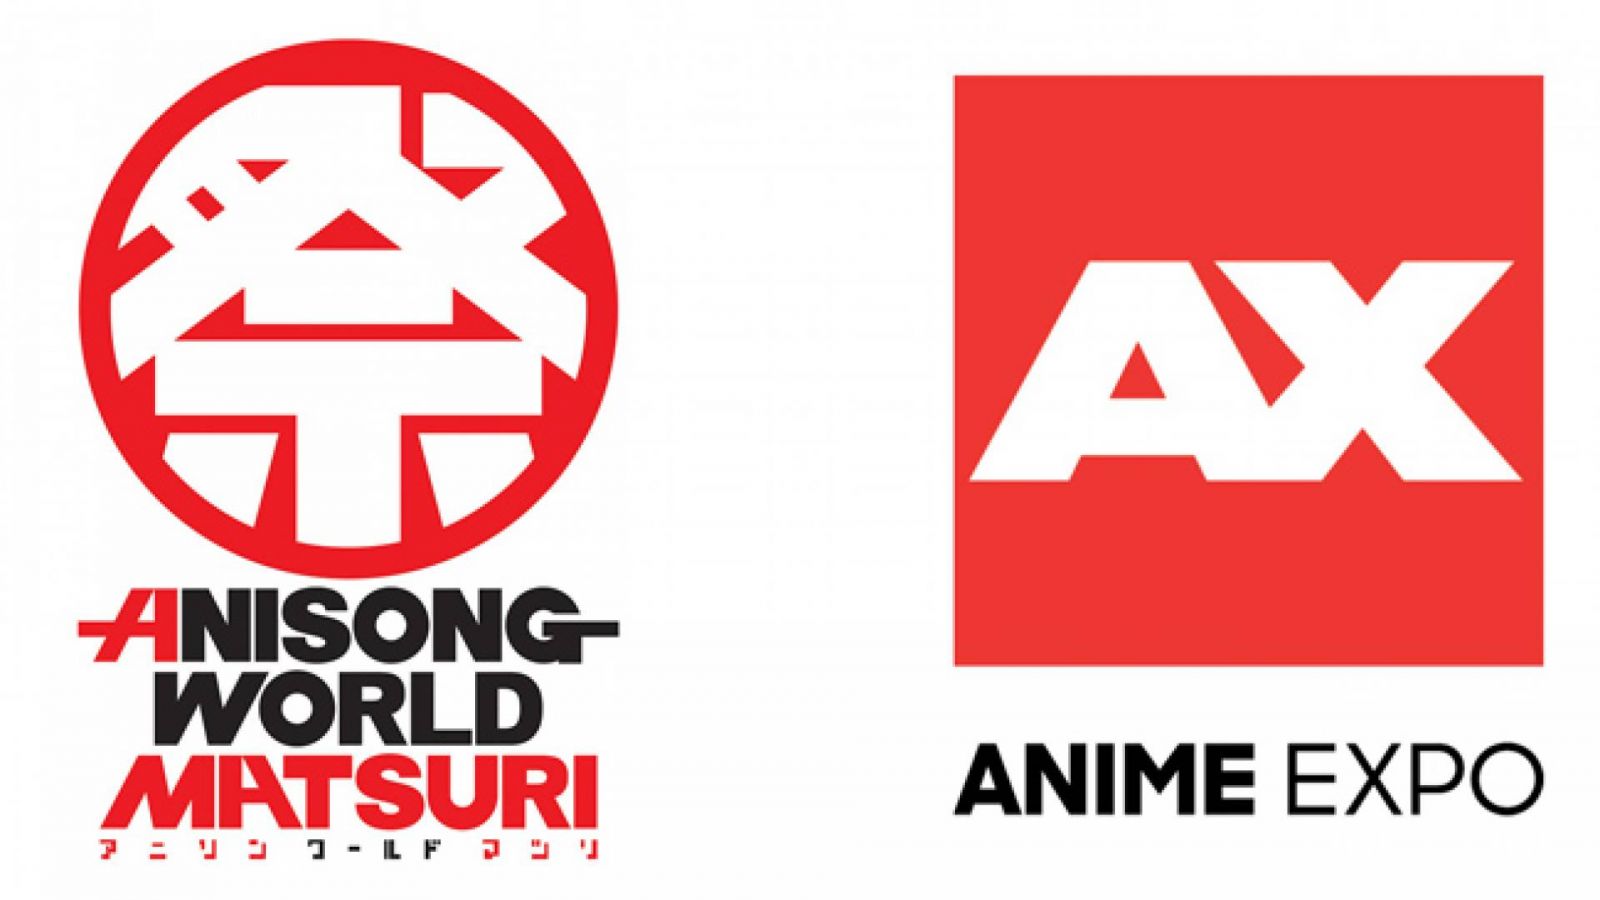 Anisong World Matsuri at Anime Expo 2018 Announces Musical Performers for Three-Day Festival Event © Anisong World Matsuri 2018 and Anime Expo 2018